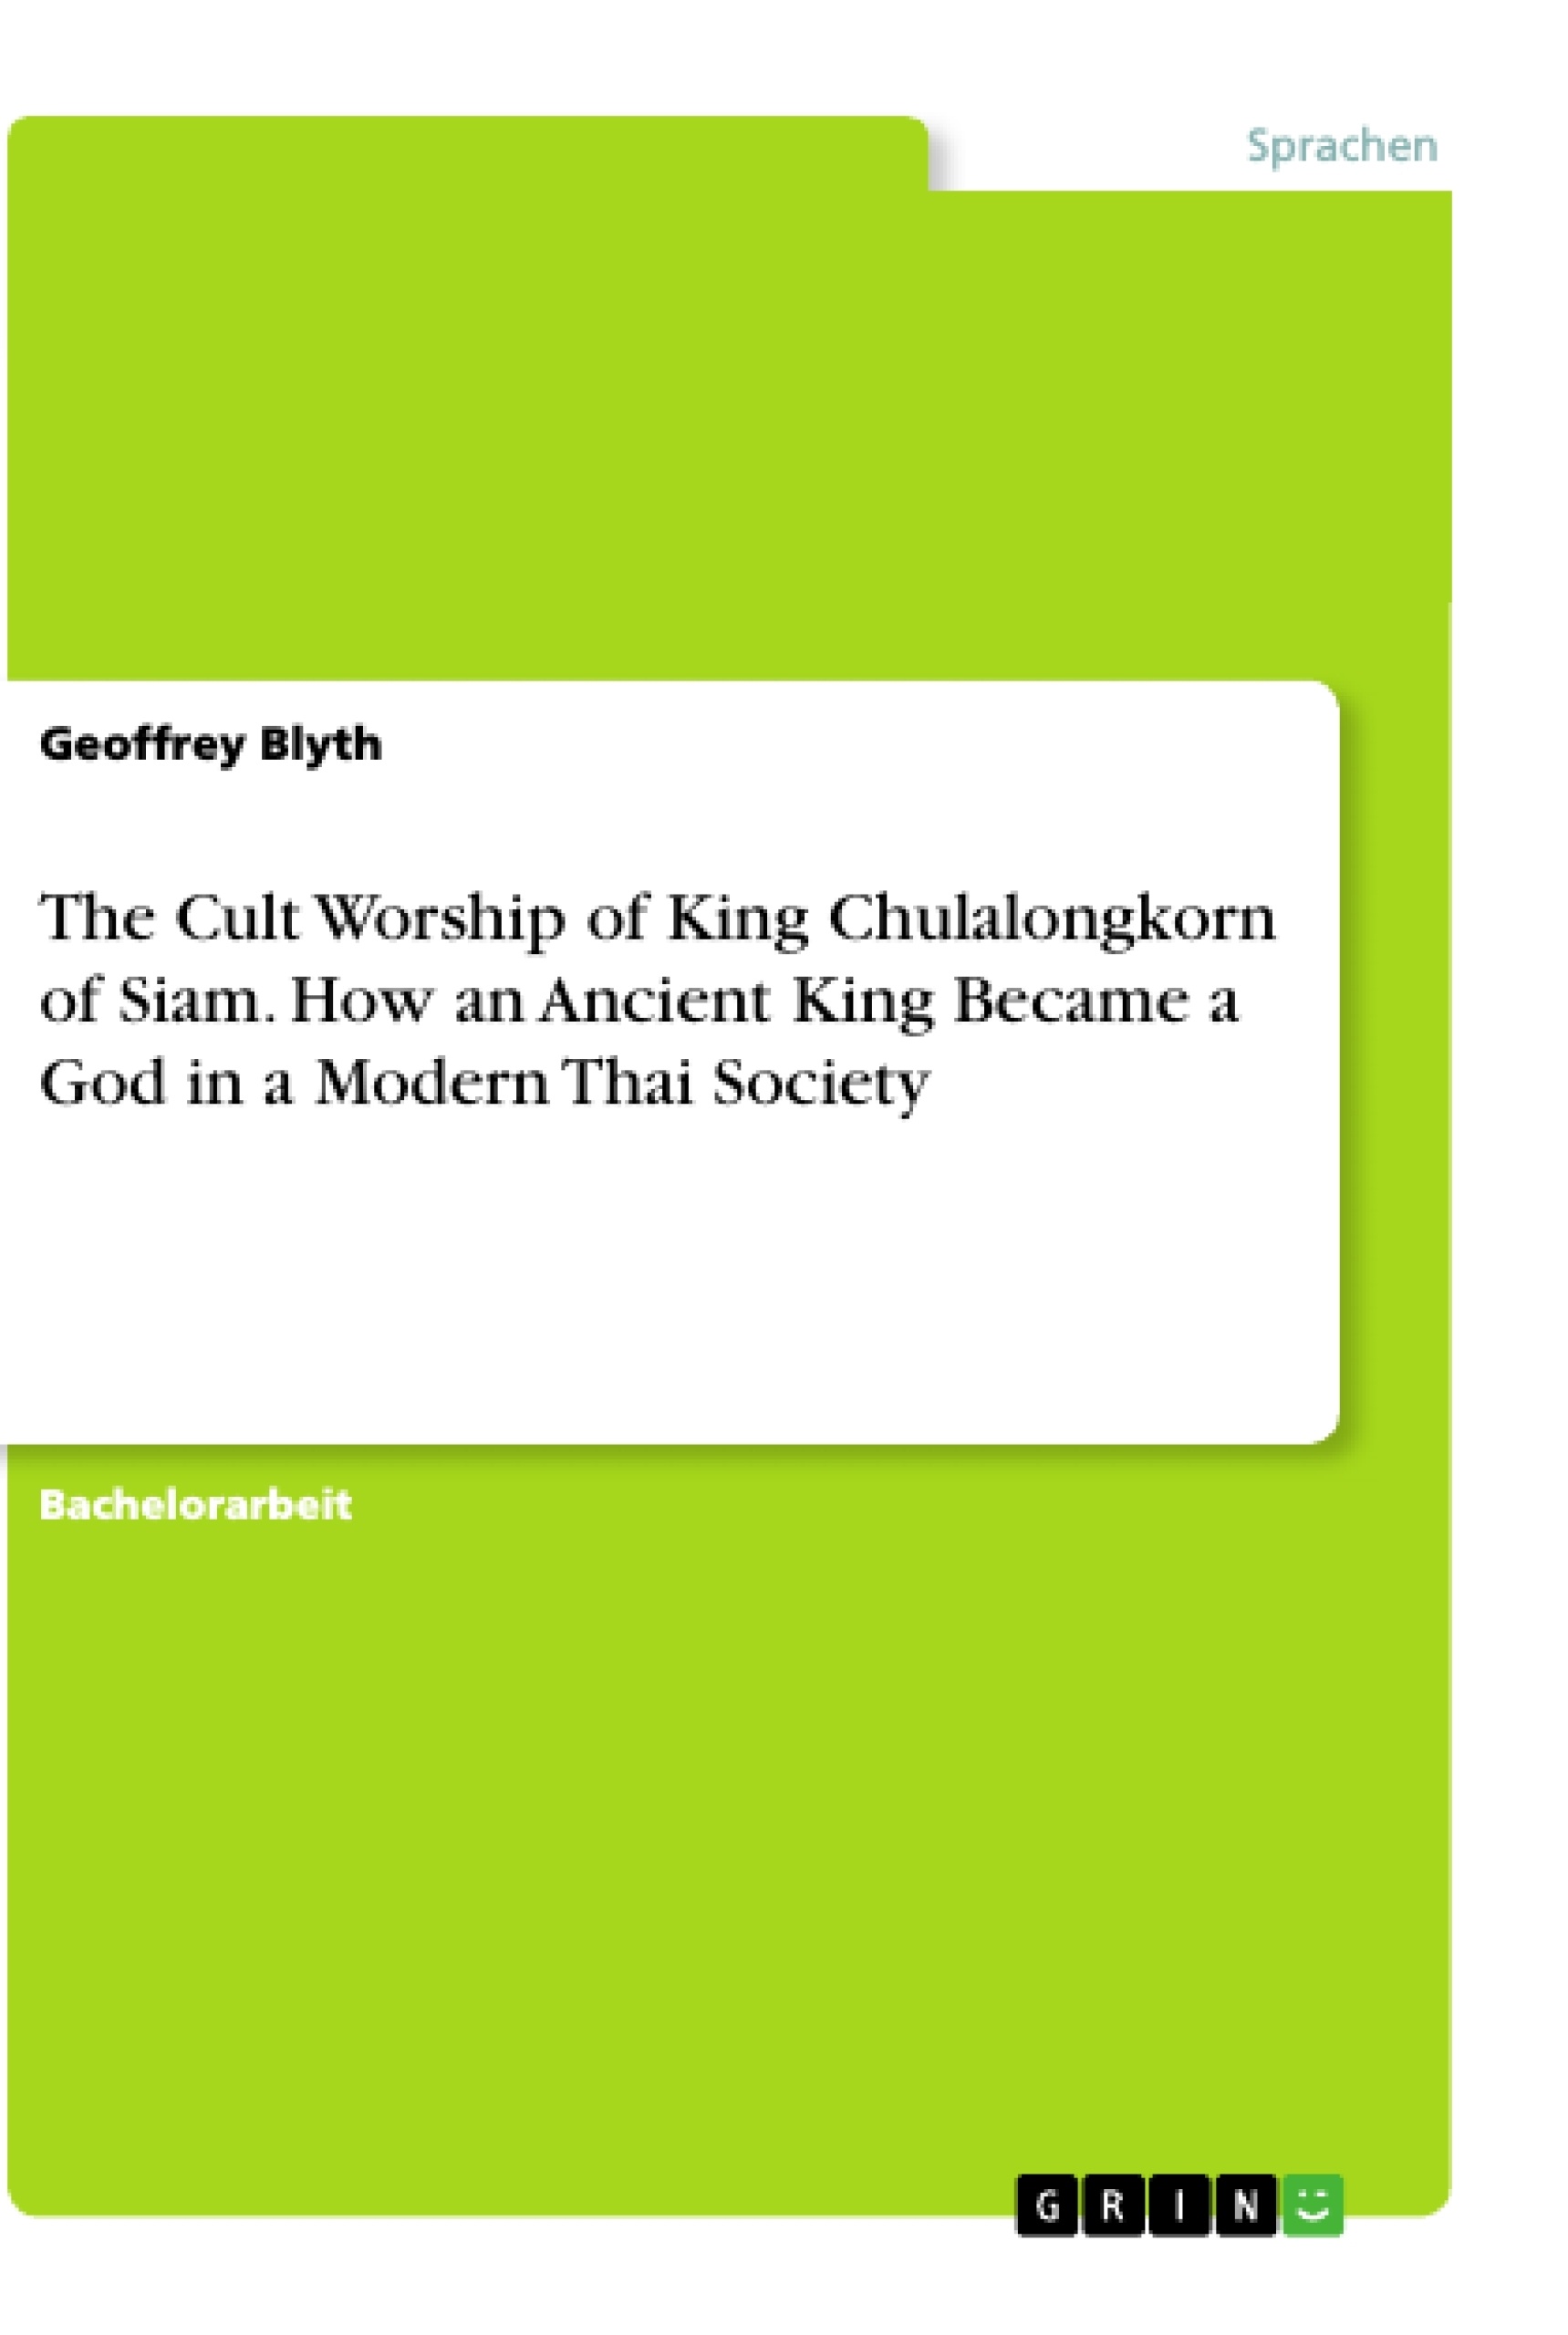 Titre: The Cult Worship of King Chulalongkorn of Siam. How an Ancient King Became a God in a Modern Thai Society